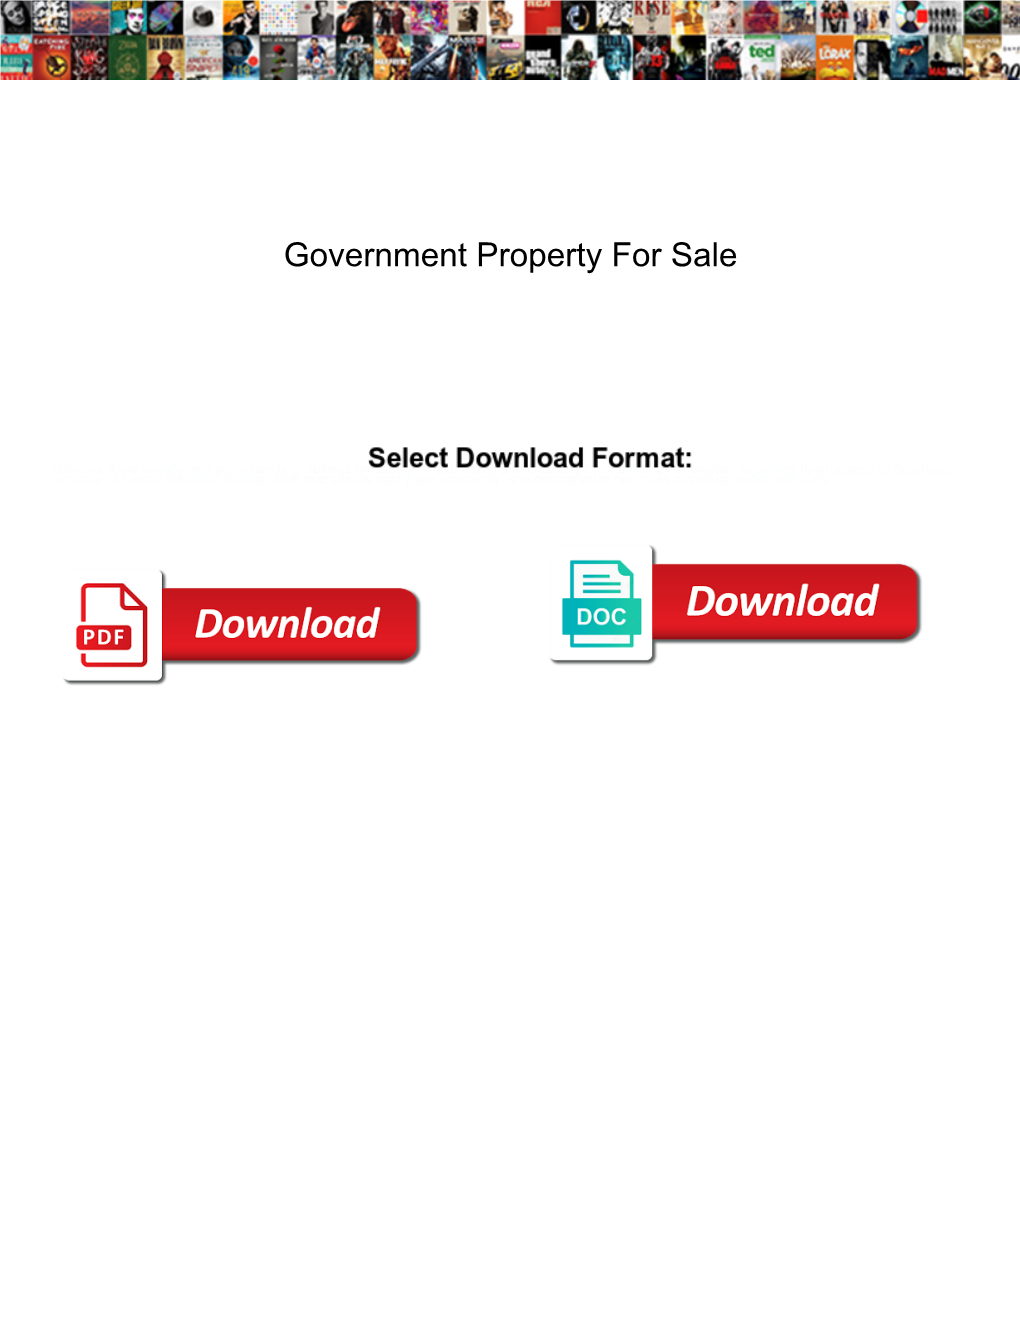 Government Property for Sale